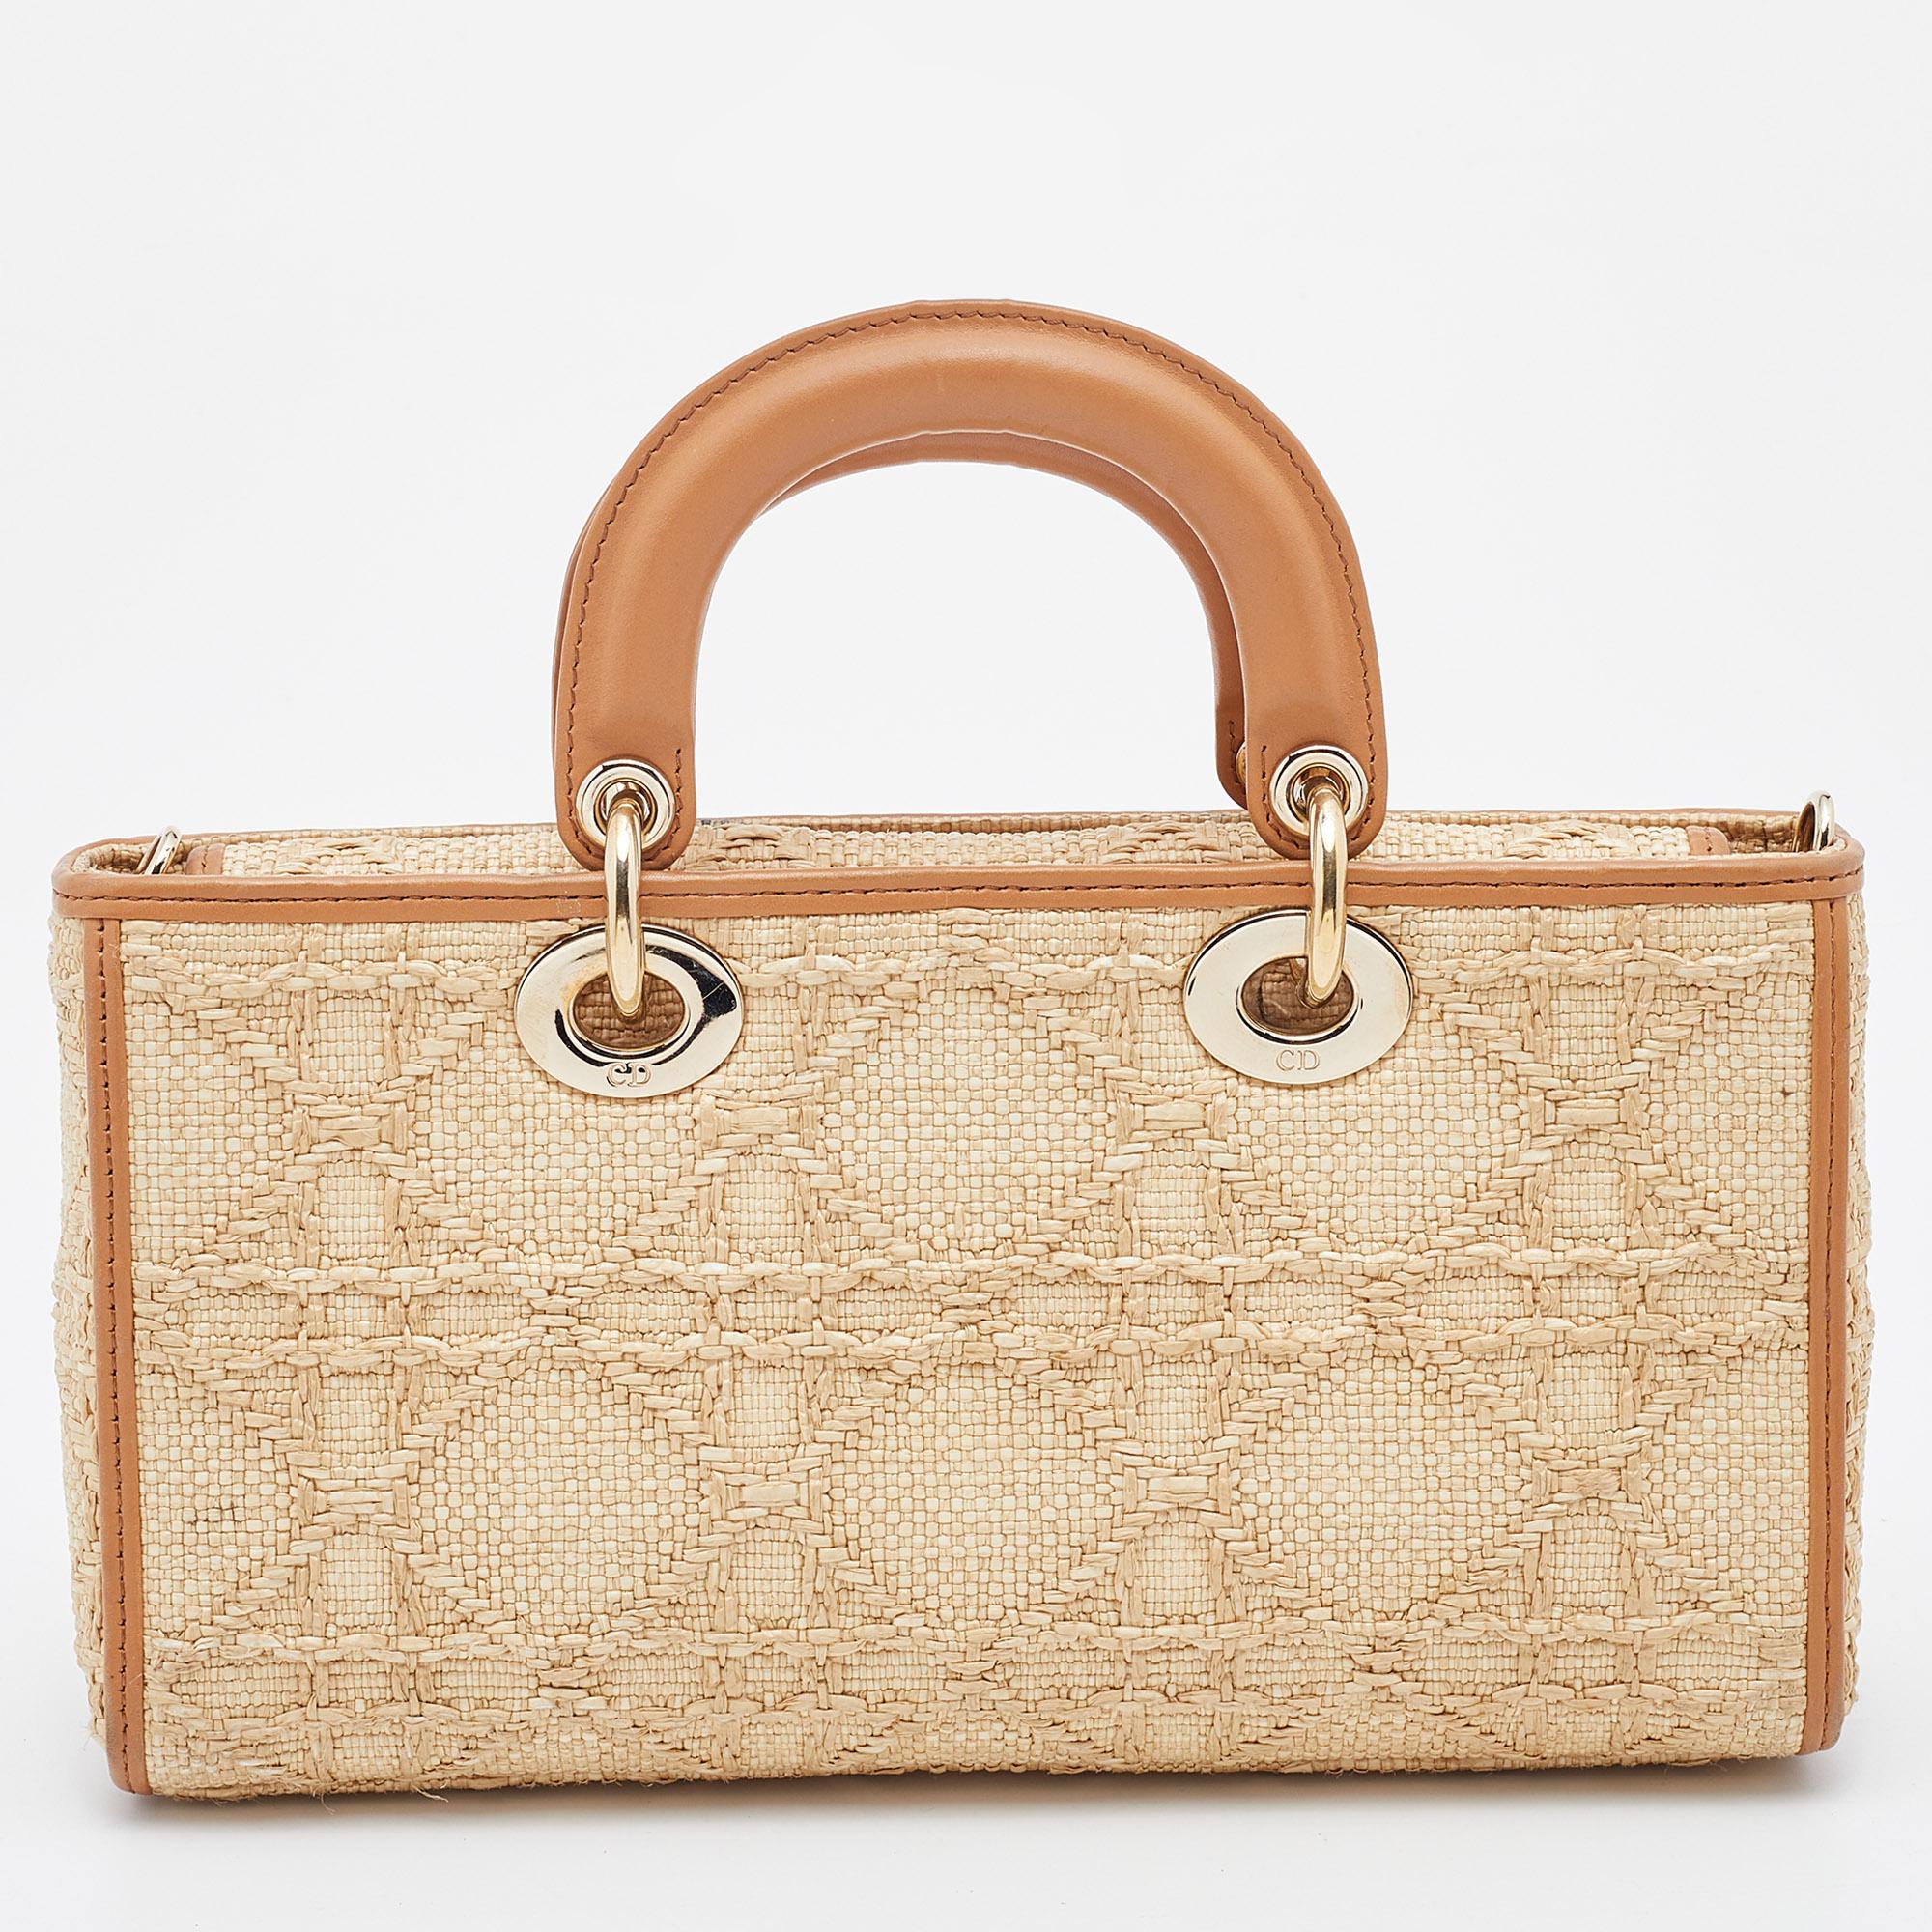 Get style and carry your essentials with ease using this Lady D-Joy bag by Dior. It has been crafted from raffia employing the signature Cannage motif, and is enhanced with leather trims & gold-tone hardware. The bag has two handles and a strap.

